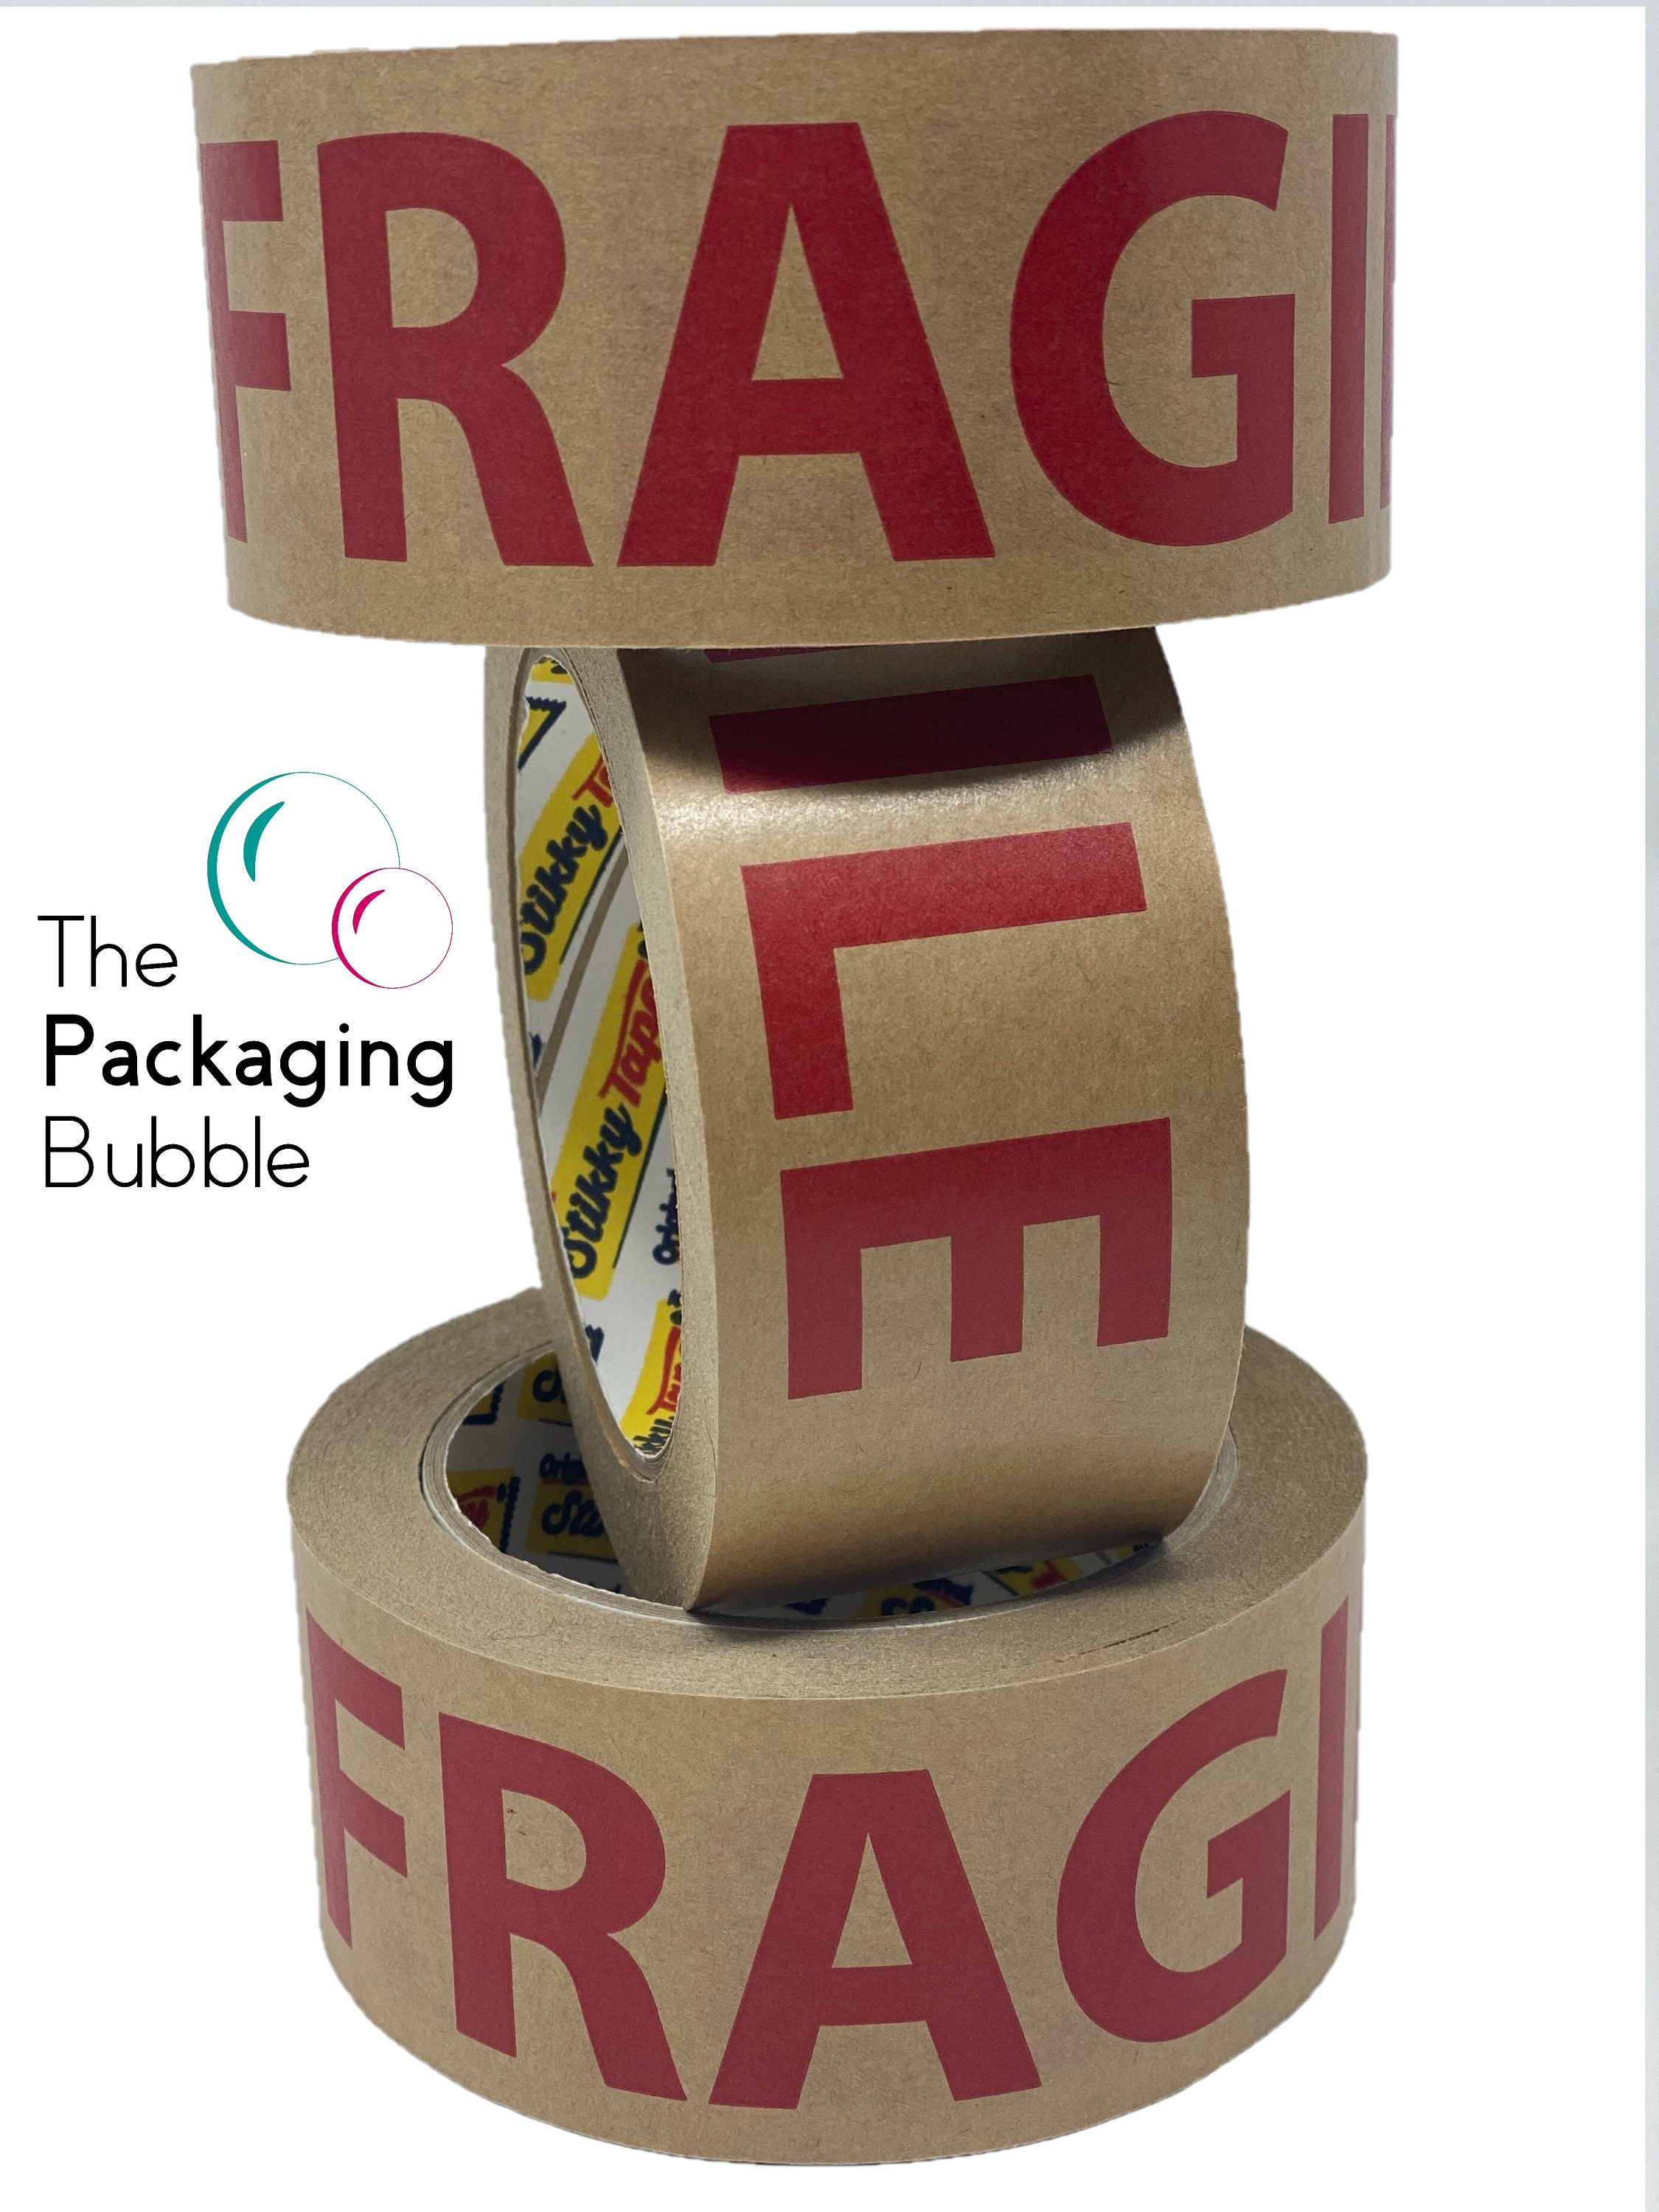 Recycled Kraft Paper Tape Eco Friendly Tape Eco Packaging Wide